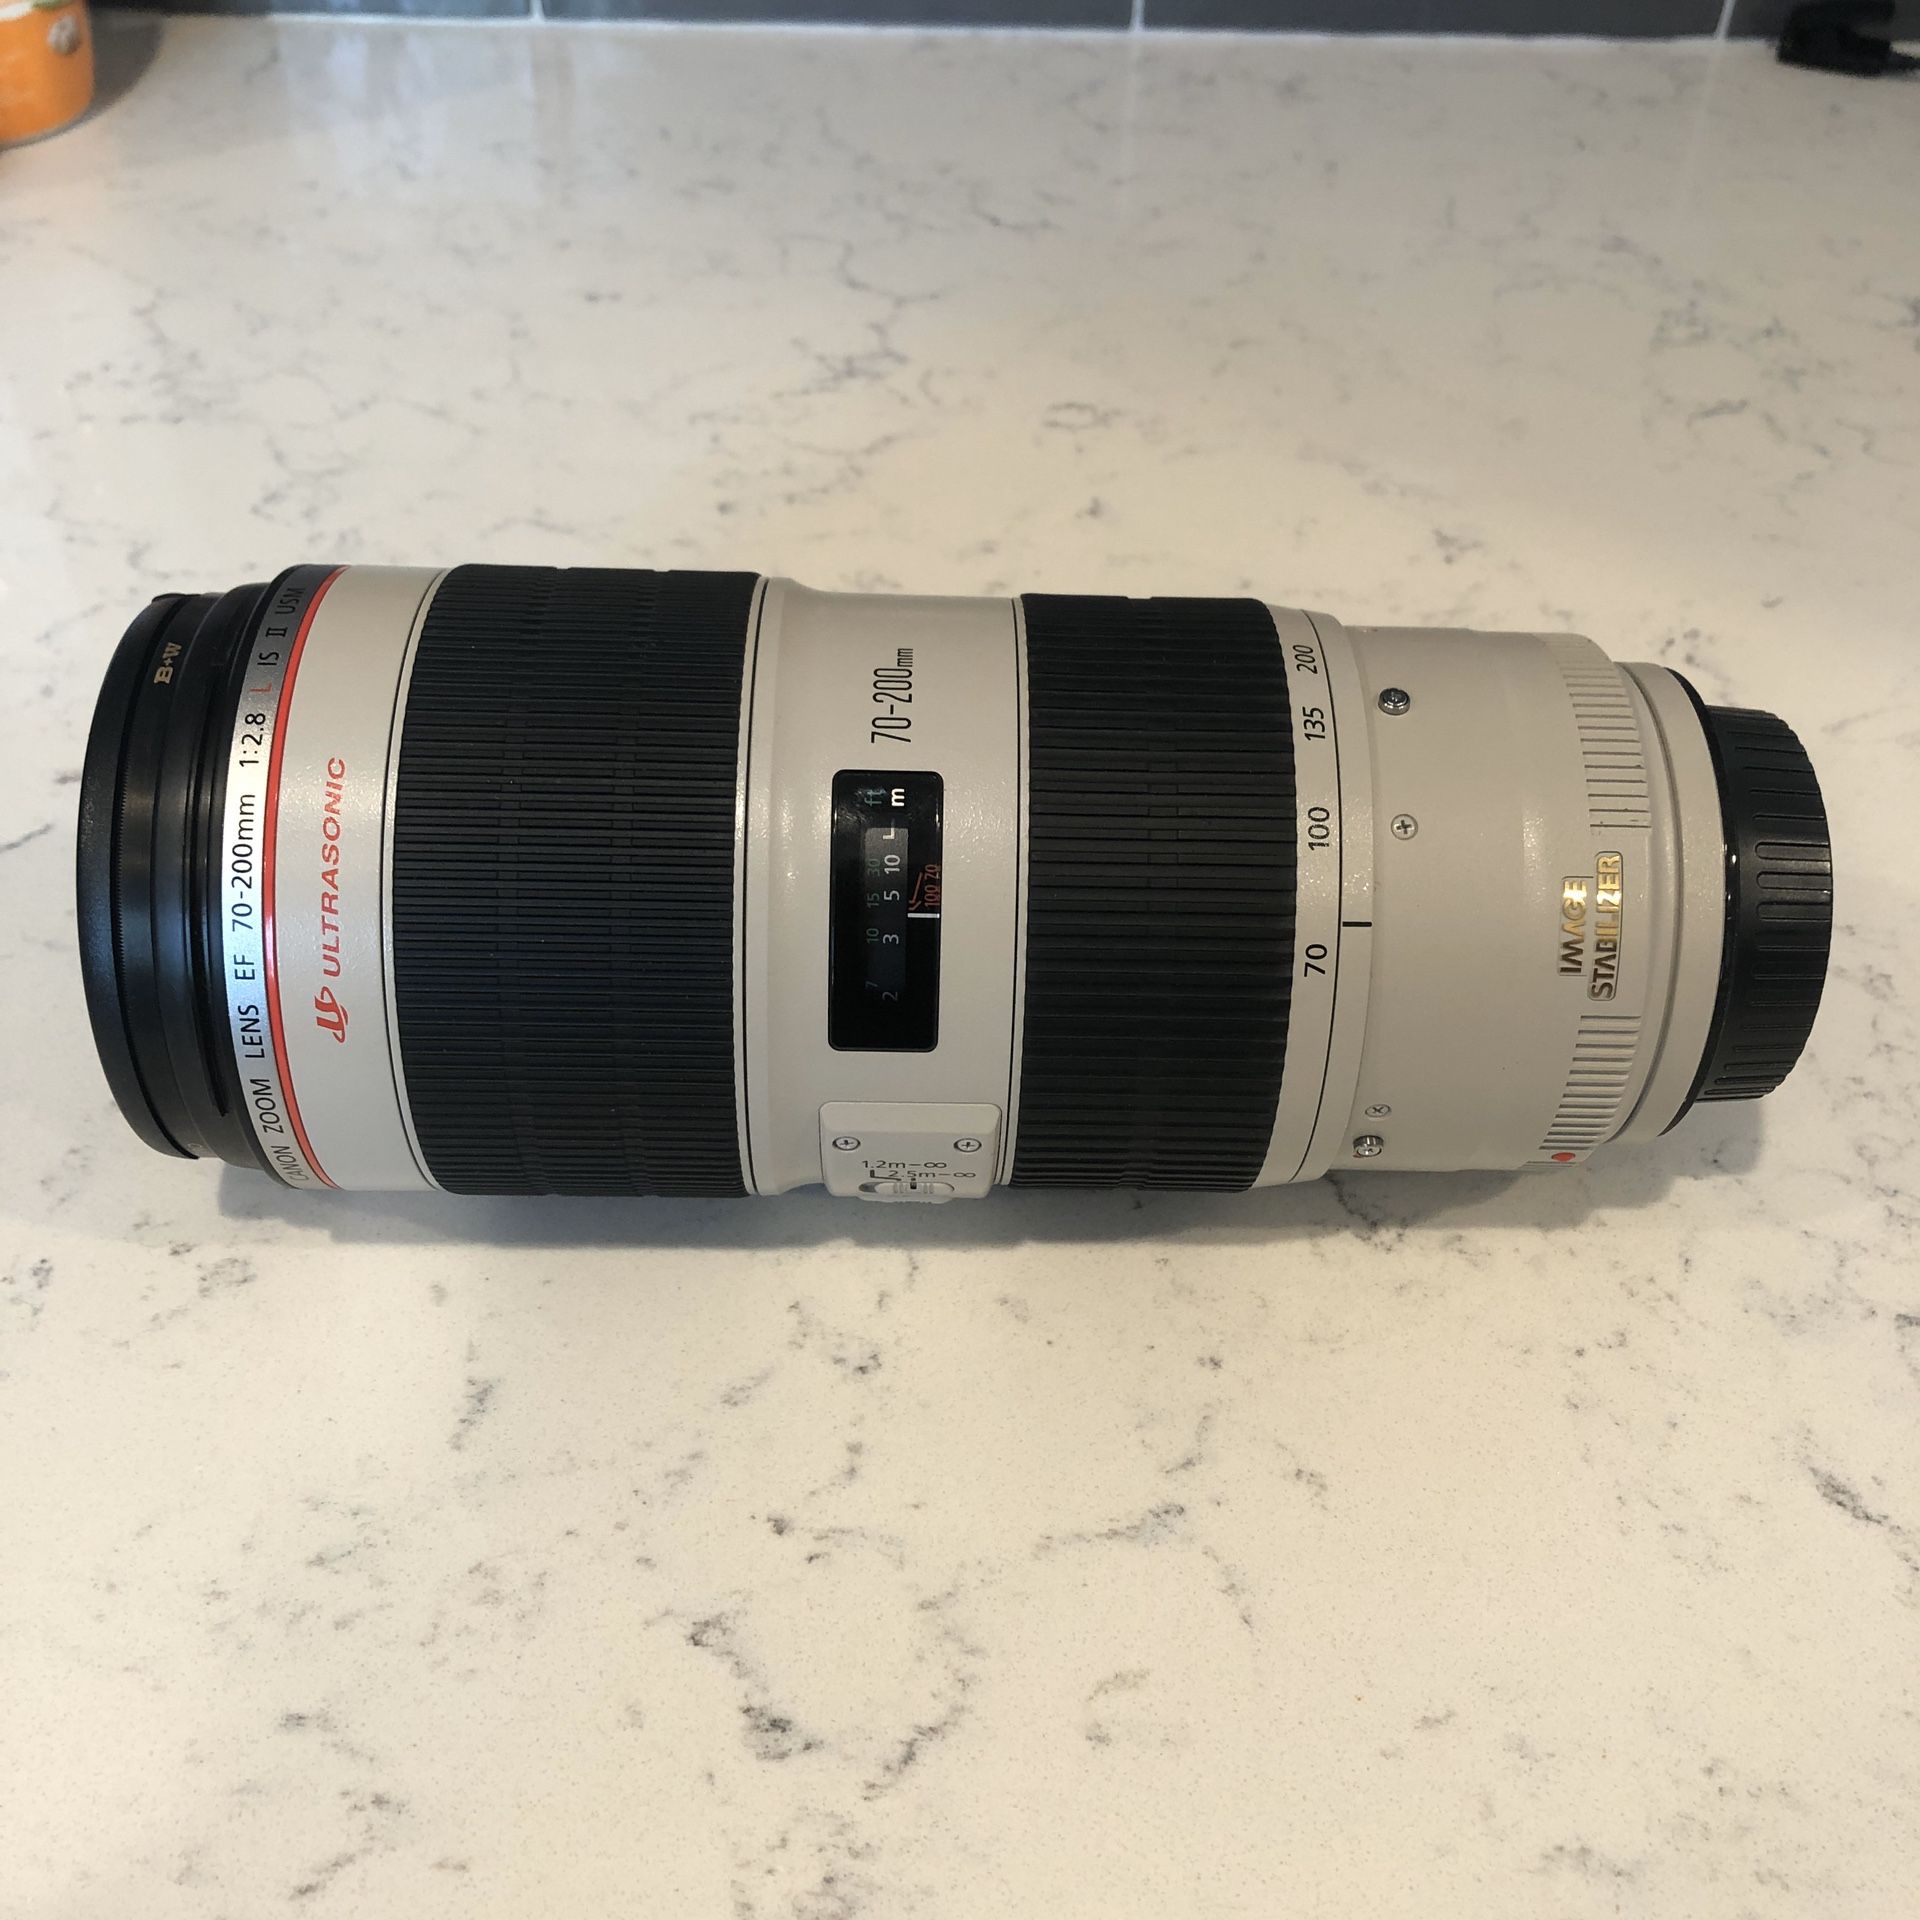 Canon EF 70-200mm f/2.8L IS II USM Telephoto lens with B+W UV Haze 1x glass filter (Germany) included. NEW & NEVER USED.